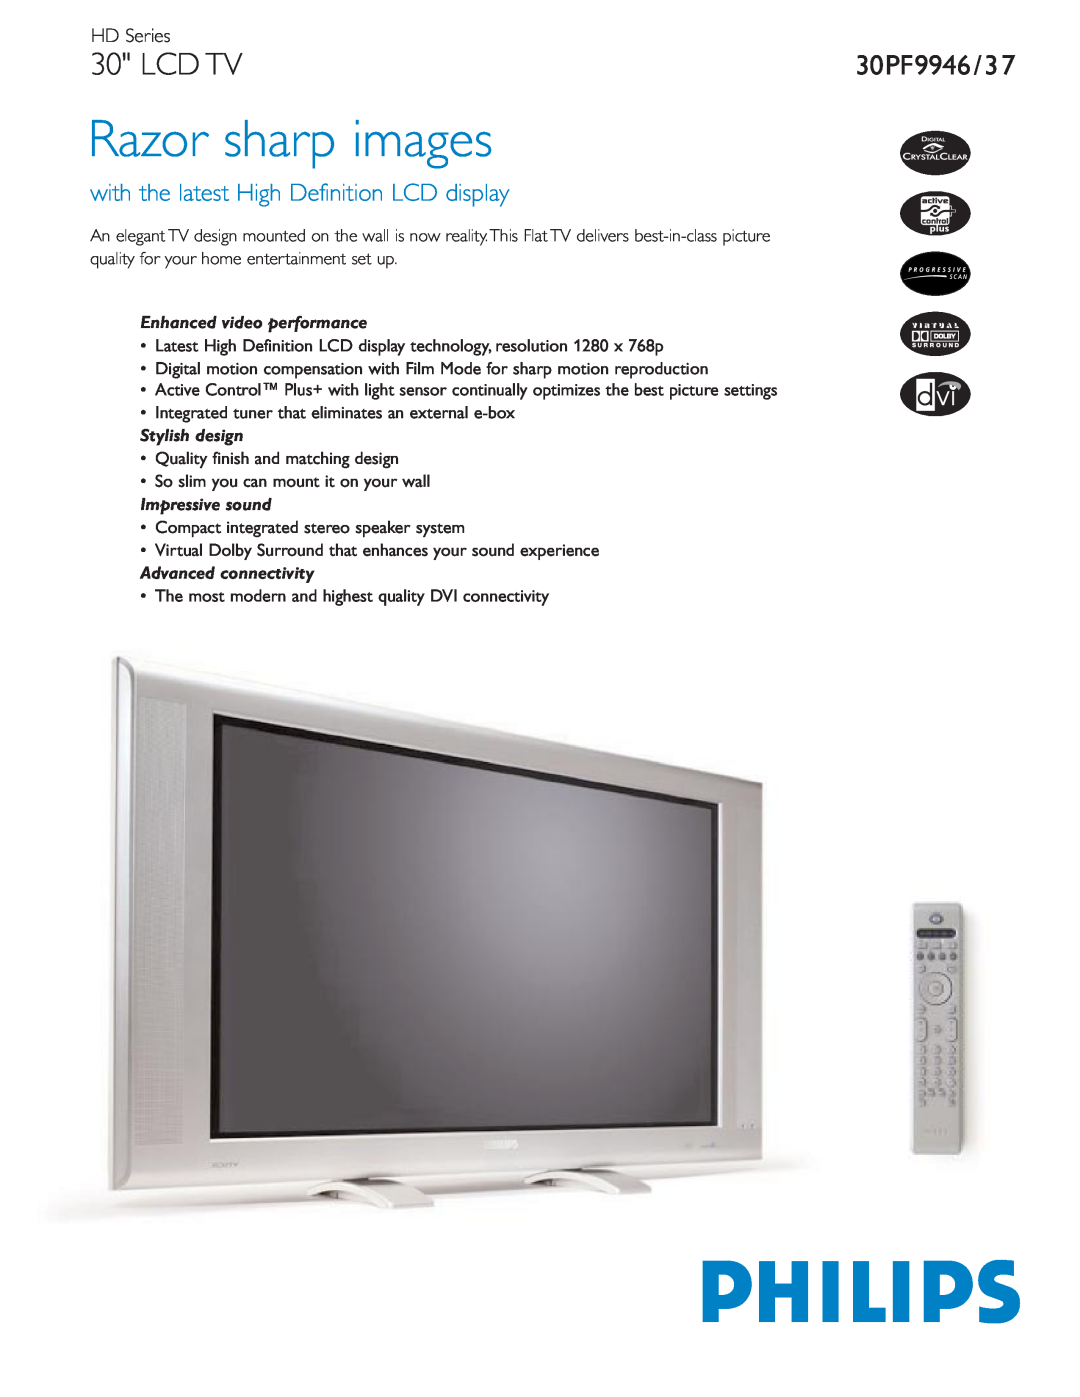 Philips 30PF9946/37 manual Lcd Tv, Razor sharp images, with the latest High Definition LCD display, 30PF9946 / 3 